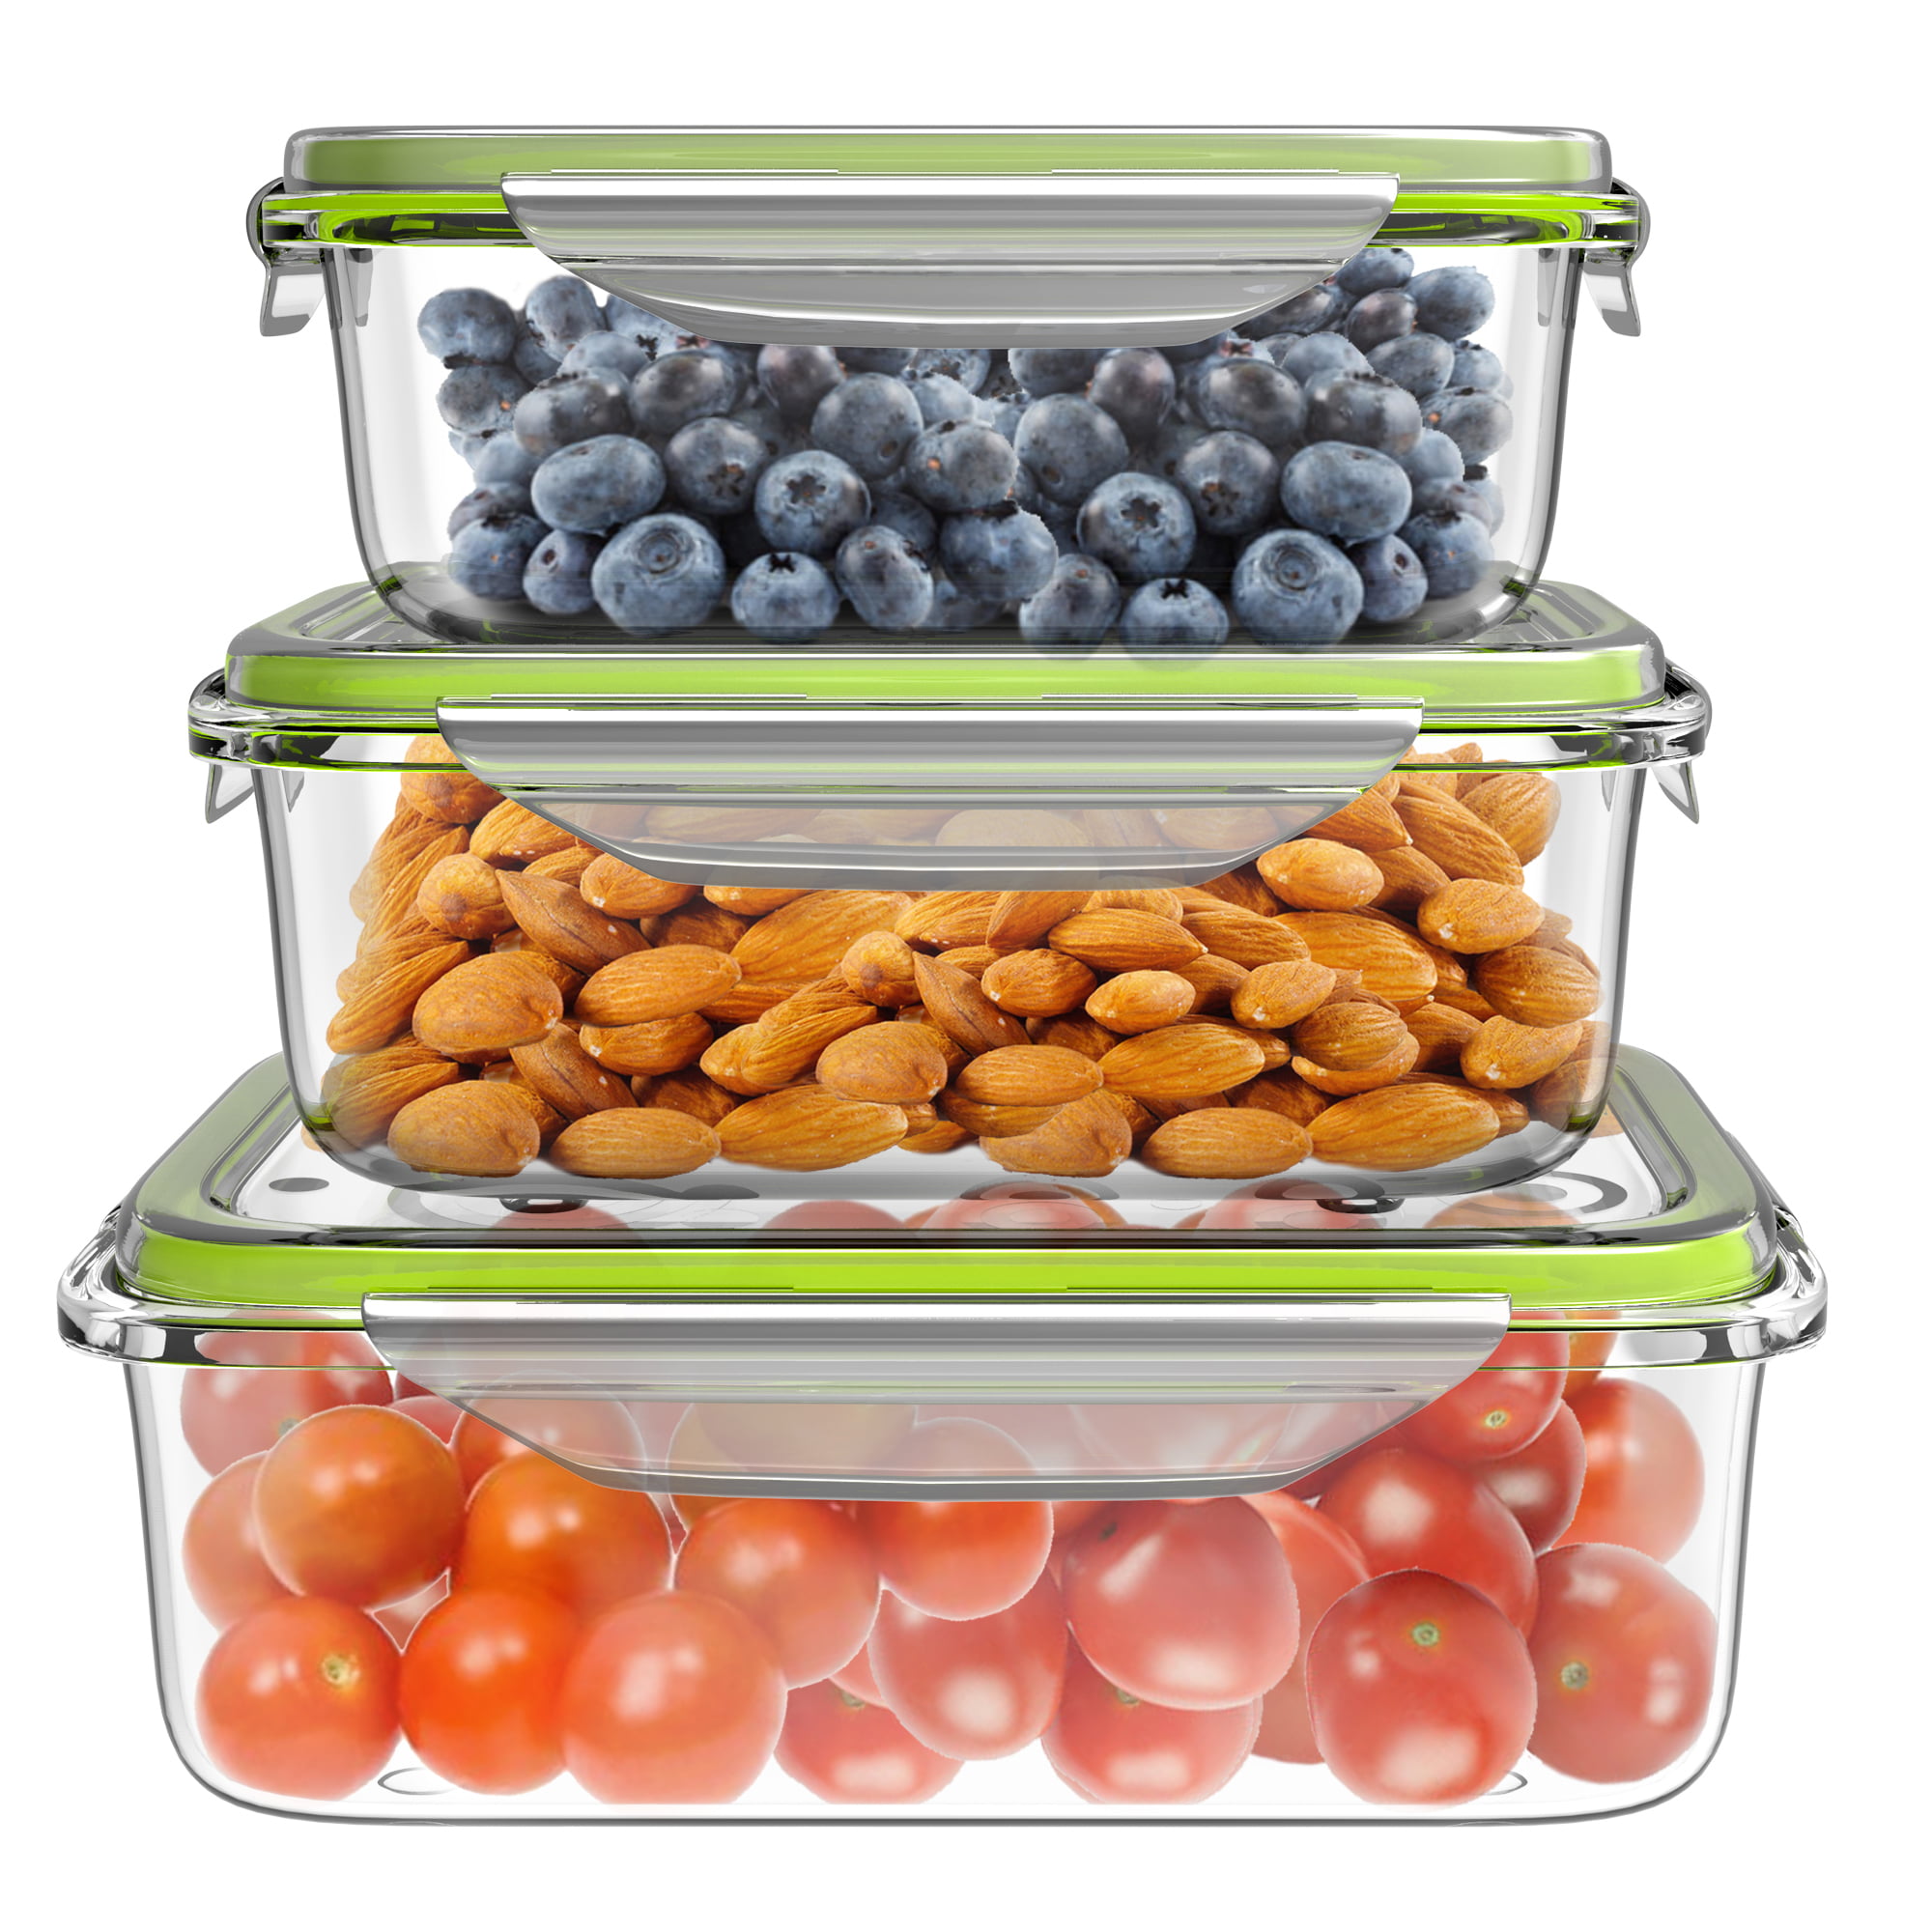 Glass Food Storage Containers with Snap Lids- 10 Piece Set (Black